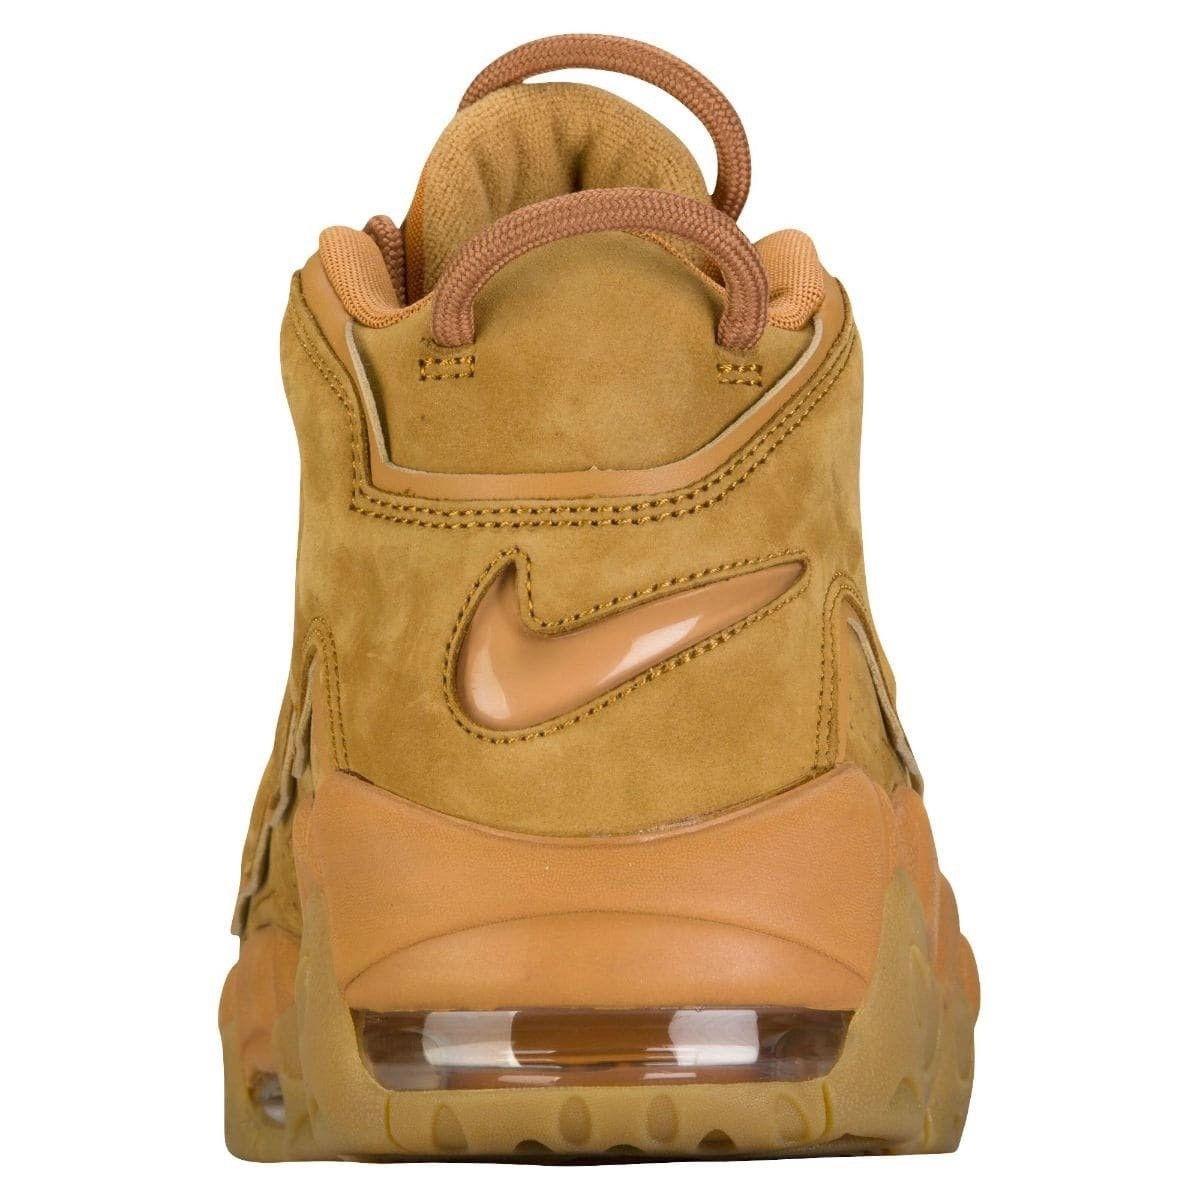 NIKE AIR MORE UPTEMPO PRM “Wheat”（AA4060-200）